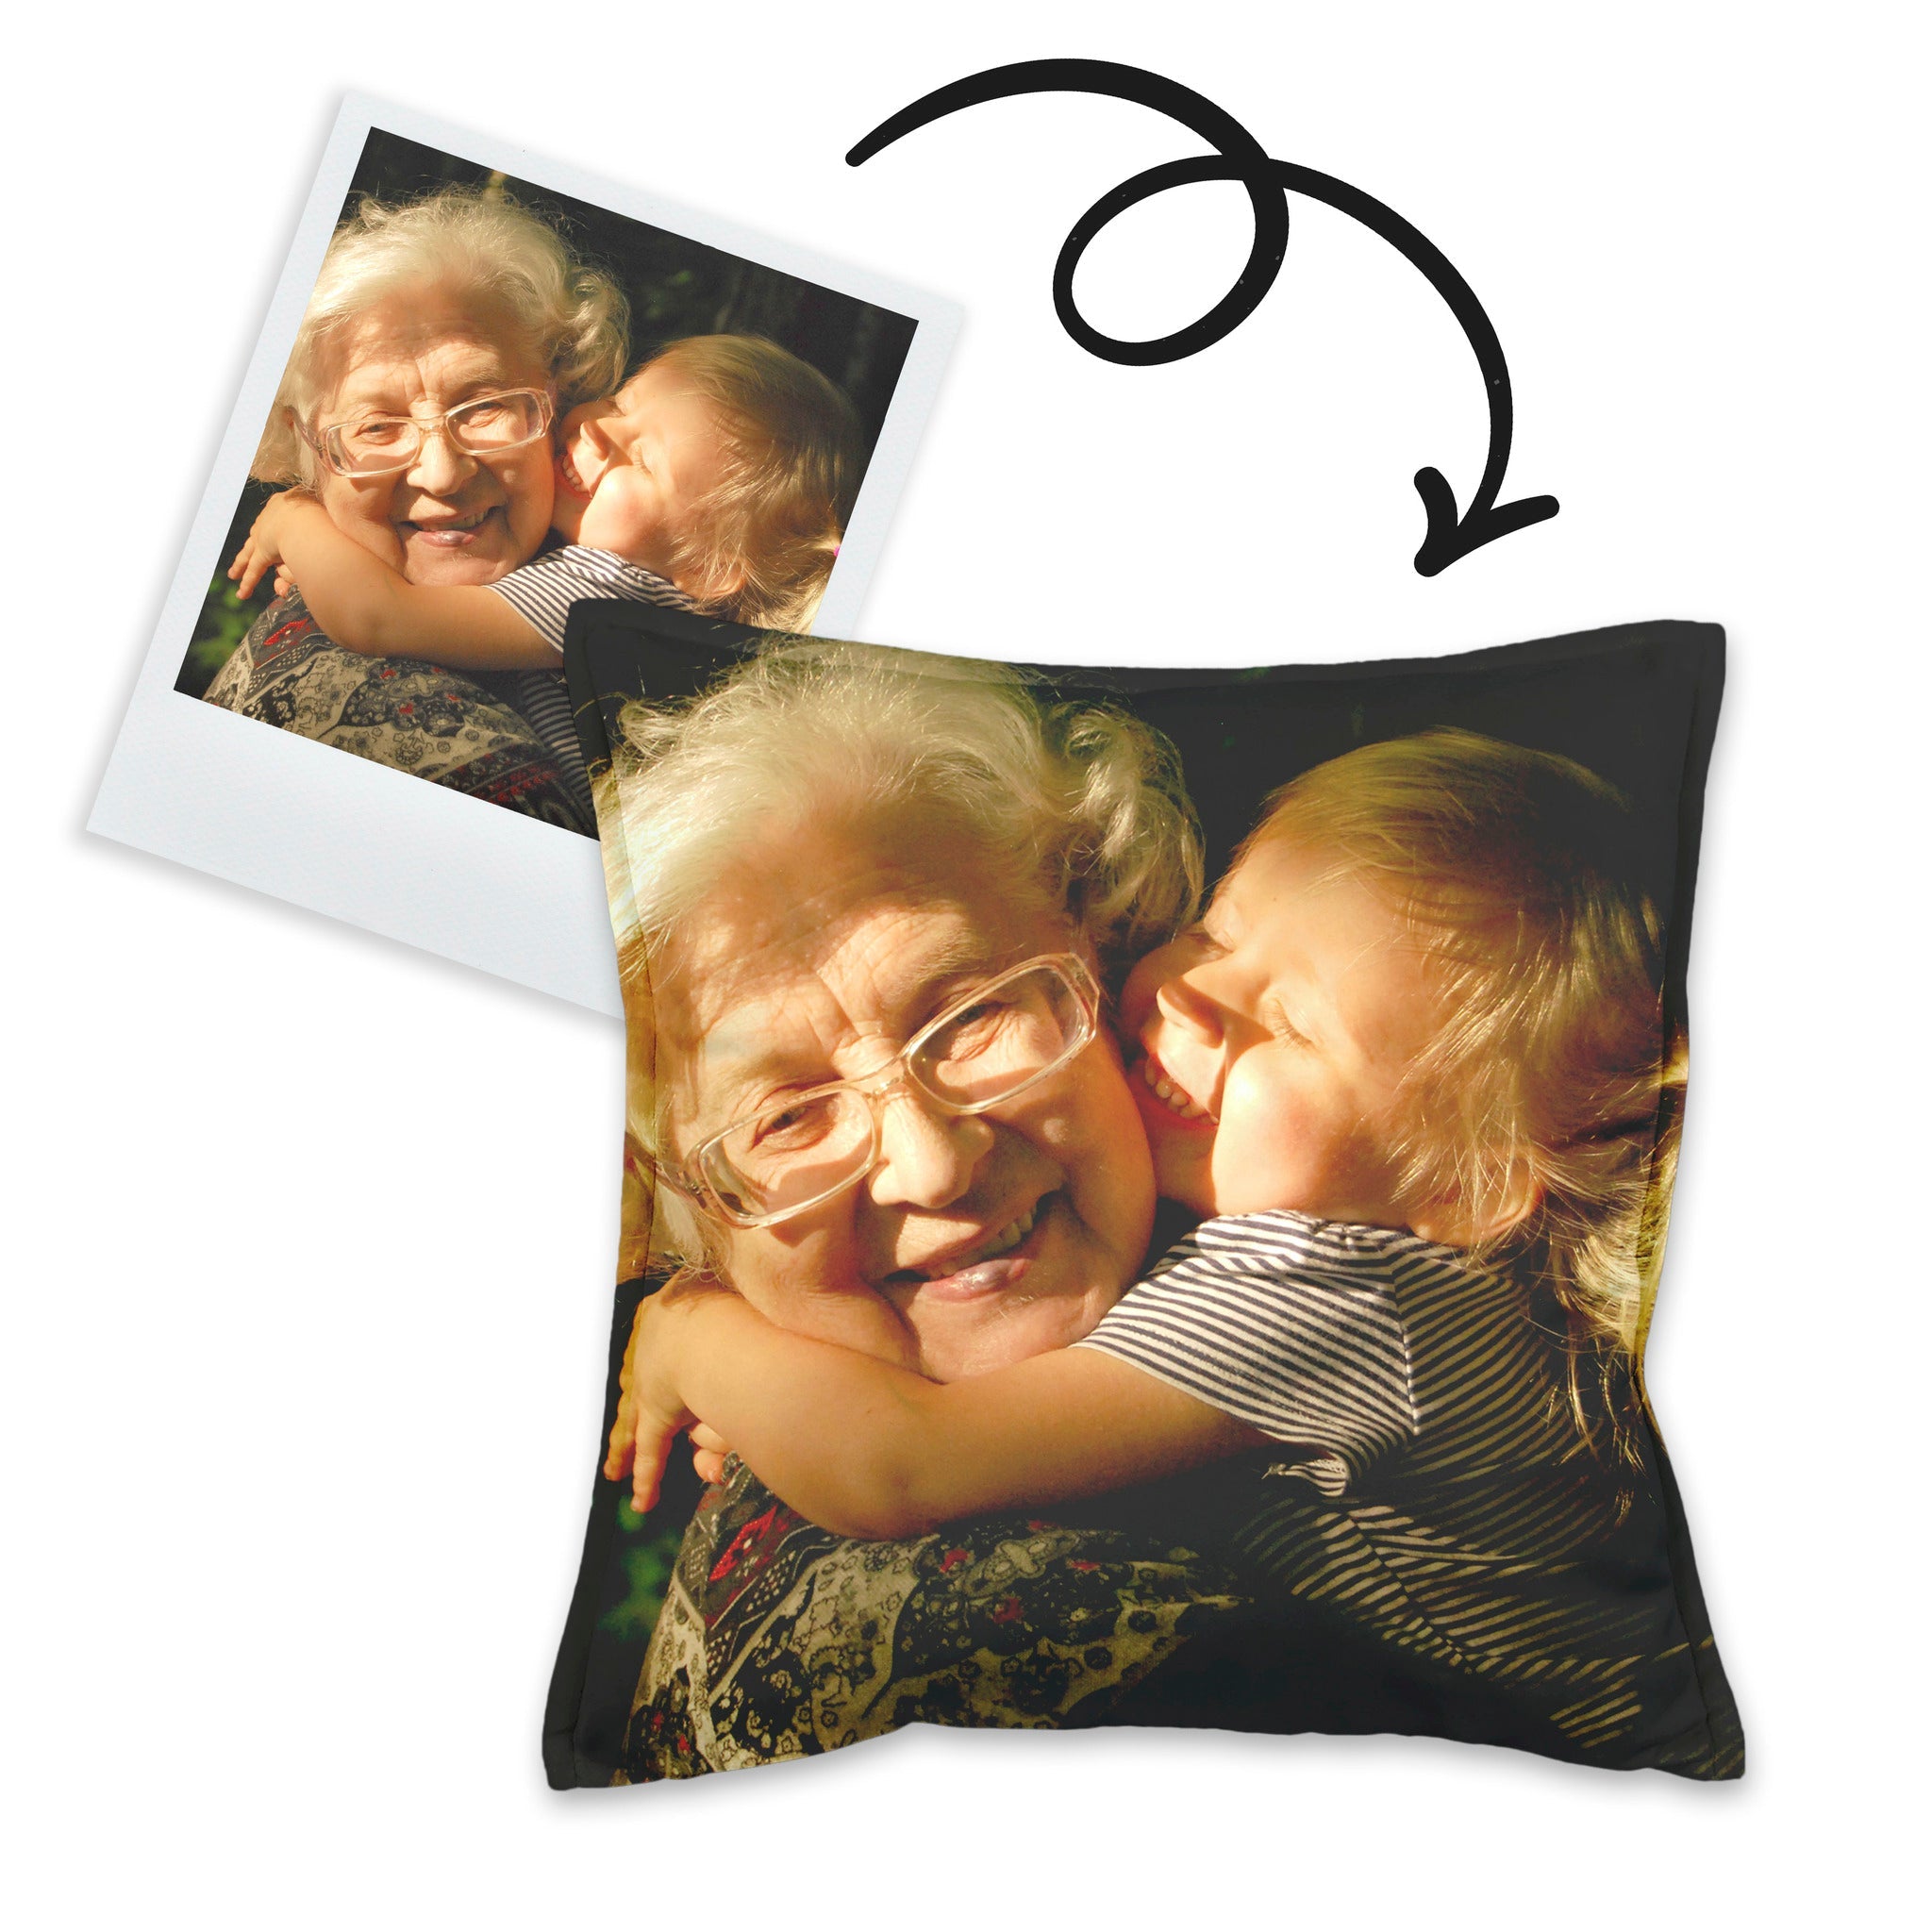 Decorative cushion with your photo.